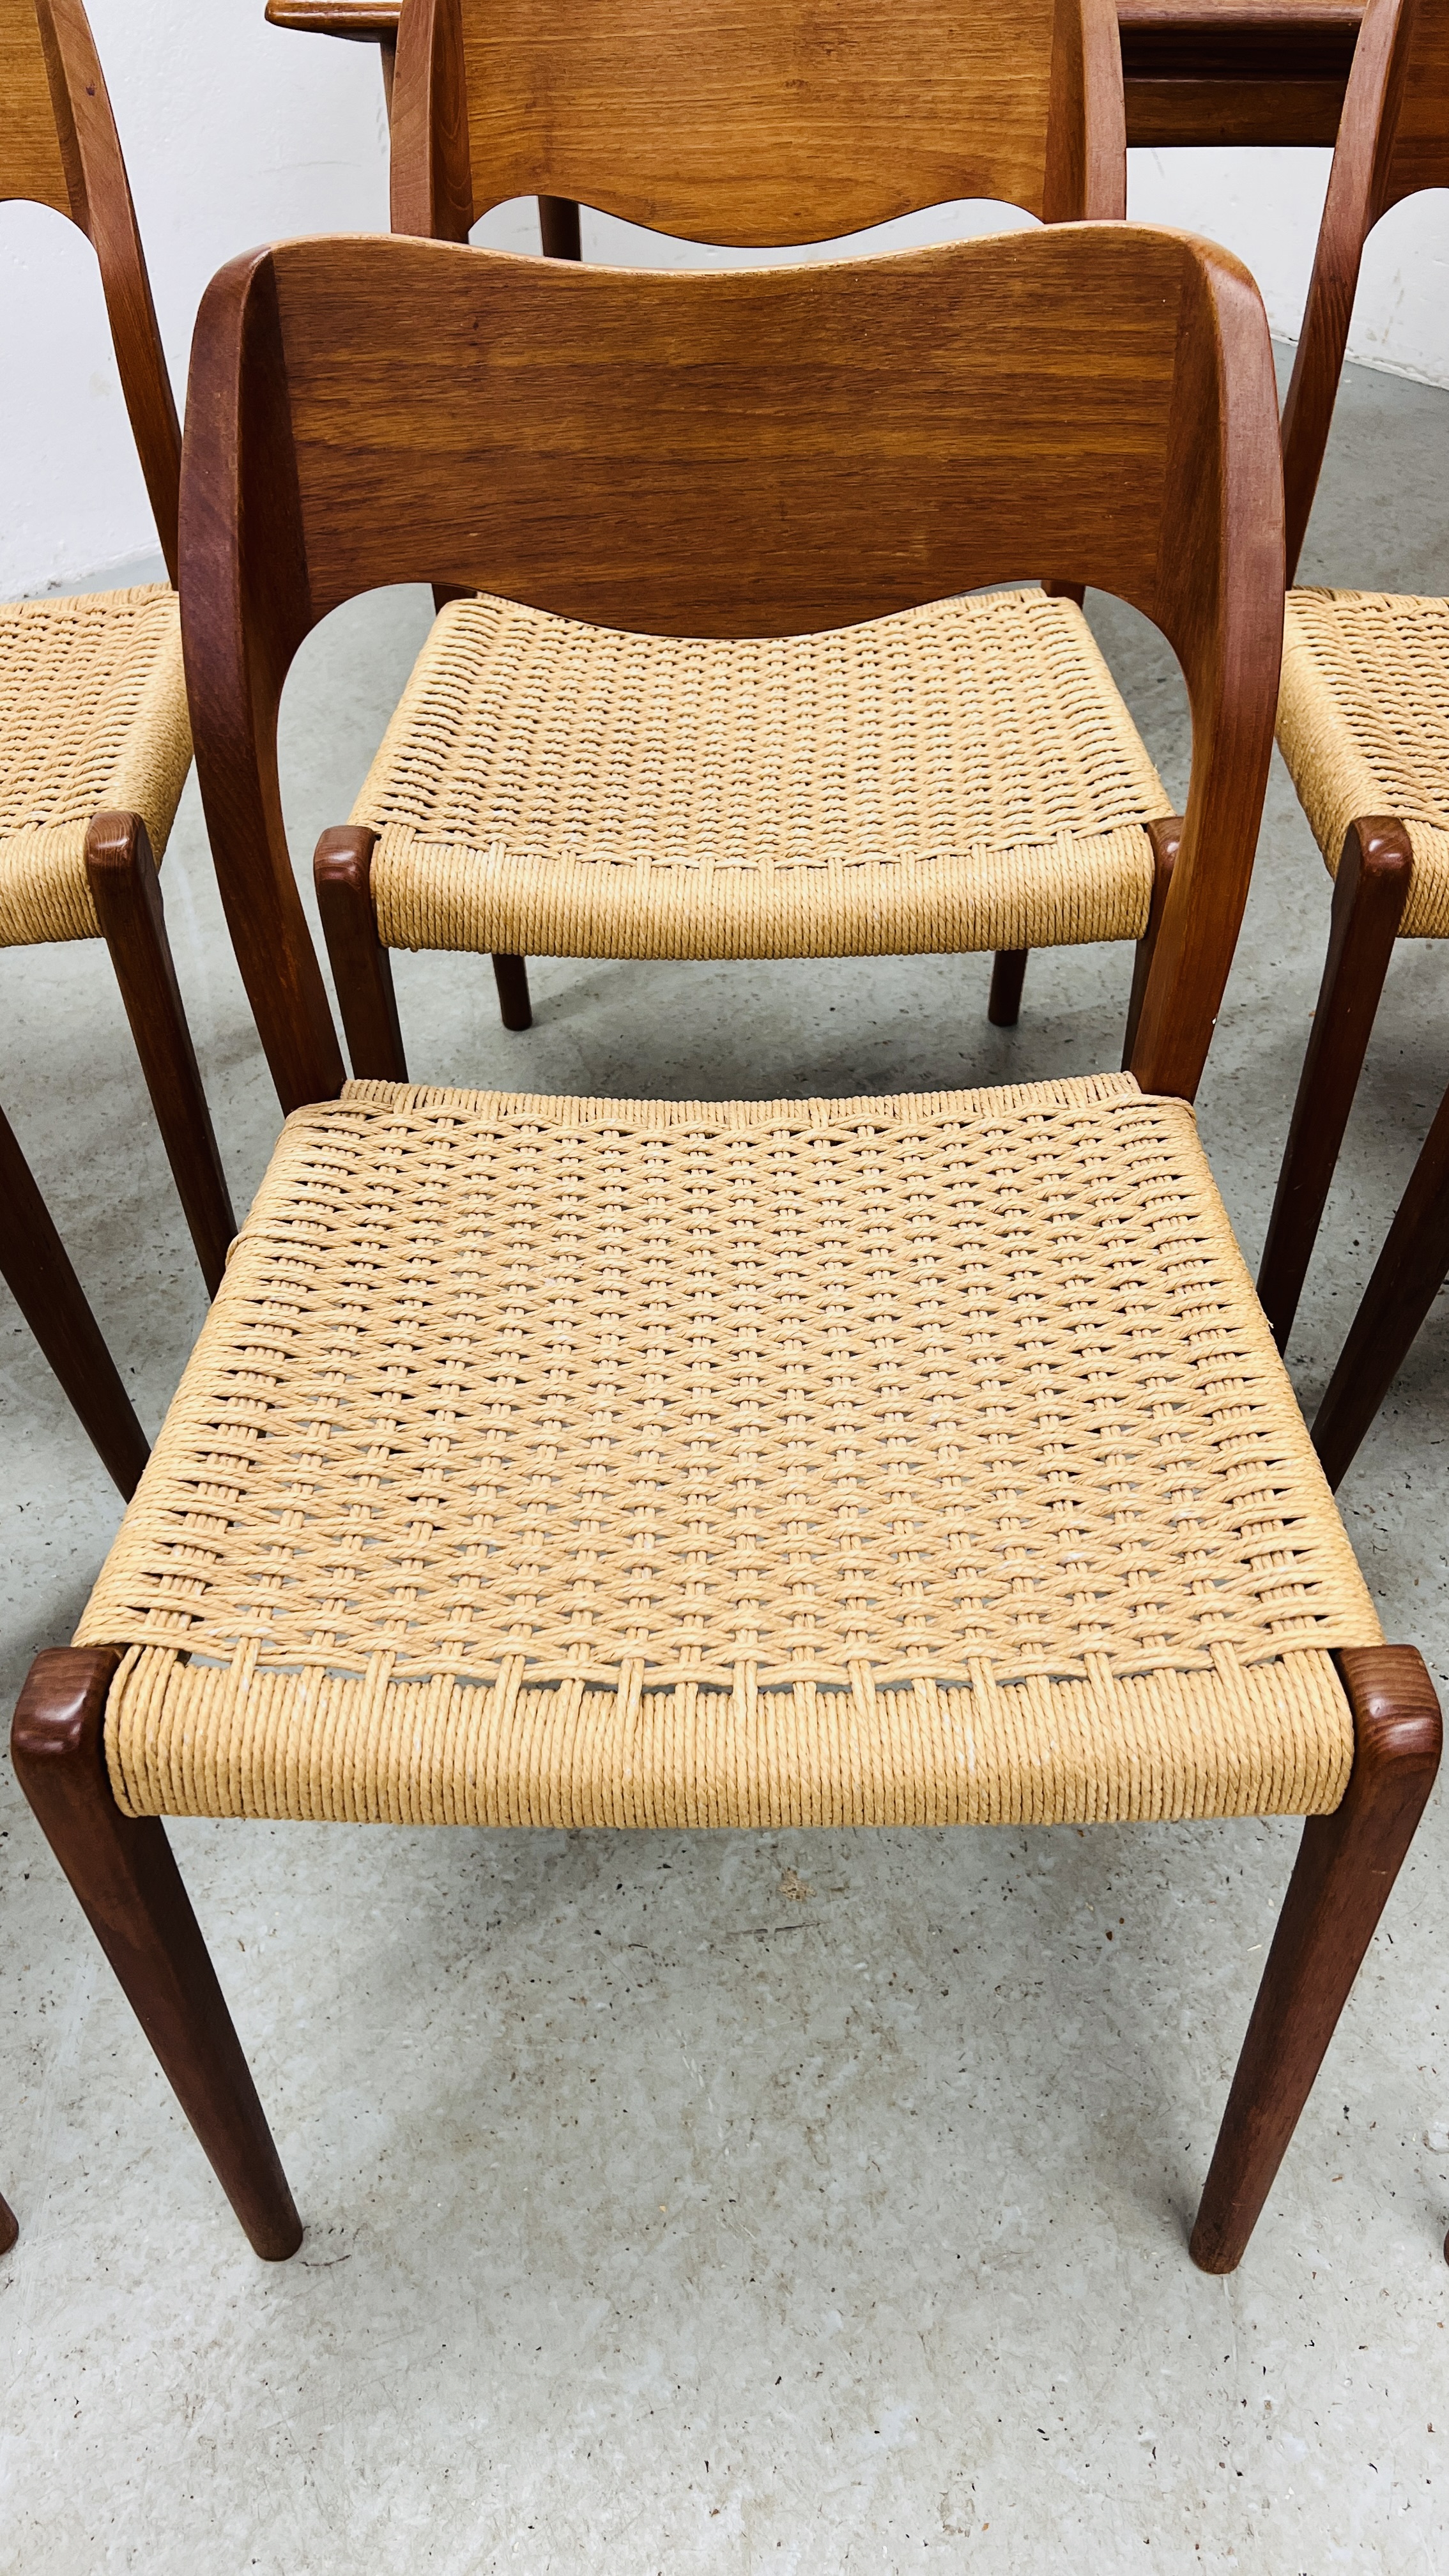 SET OF EIGHT J MOLLER DANISH TEAK DINING CHAIRS WITH WOVEN SISAL SEATS ALONG WITH A DRAWER LEAF - Image 11 of 48